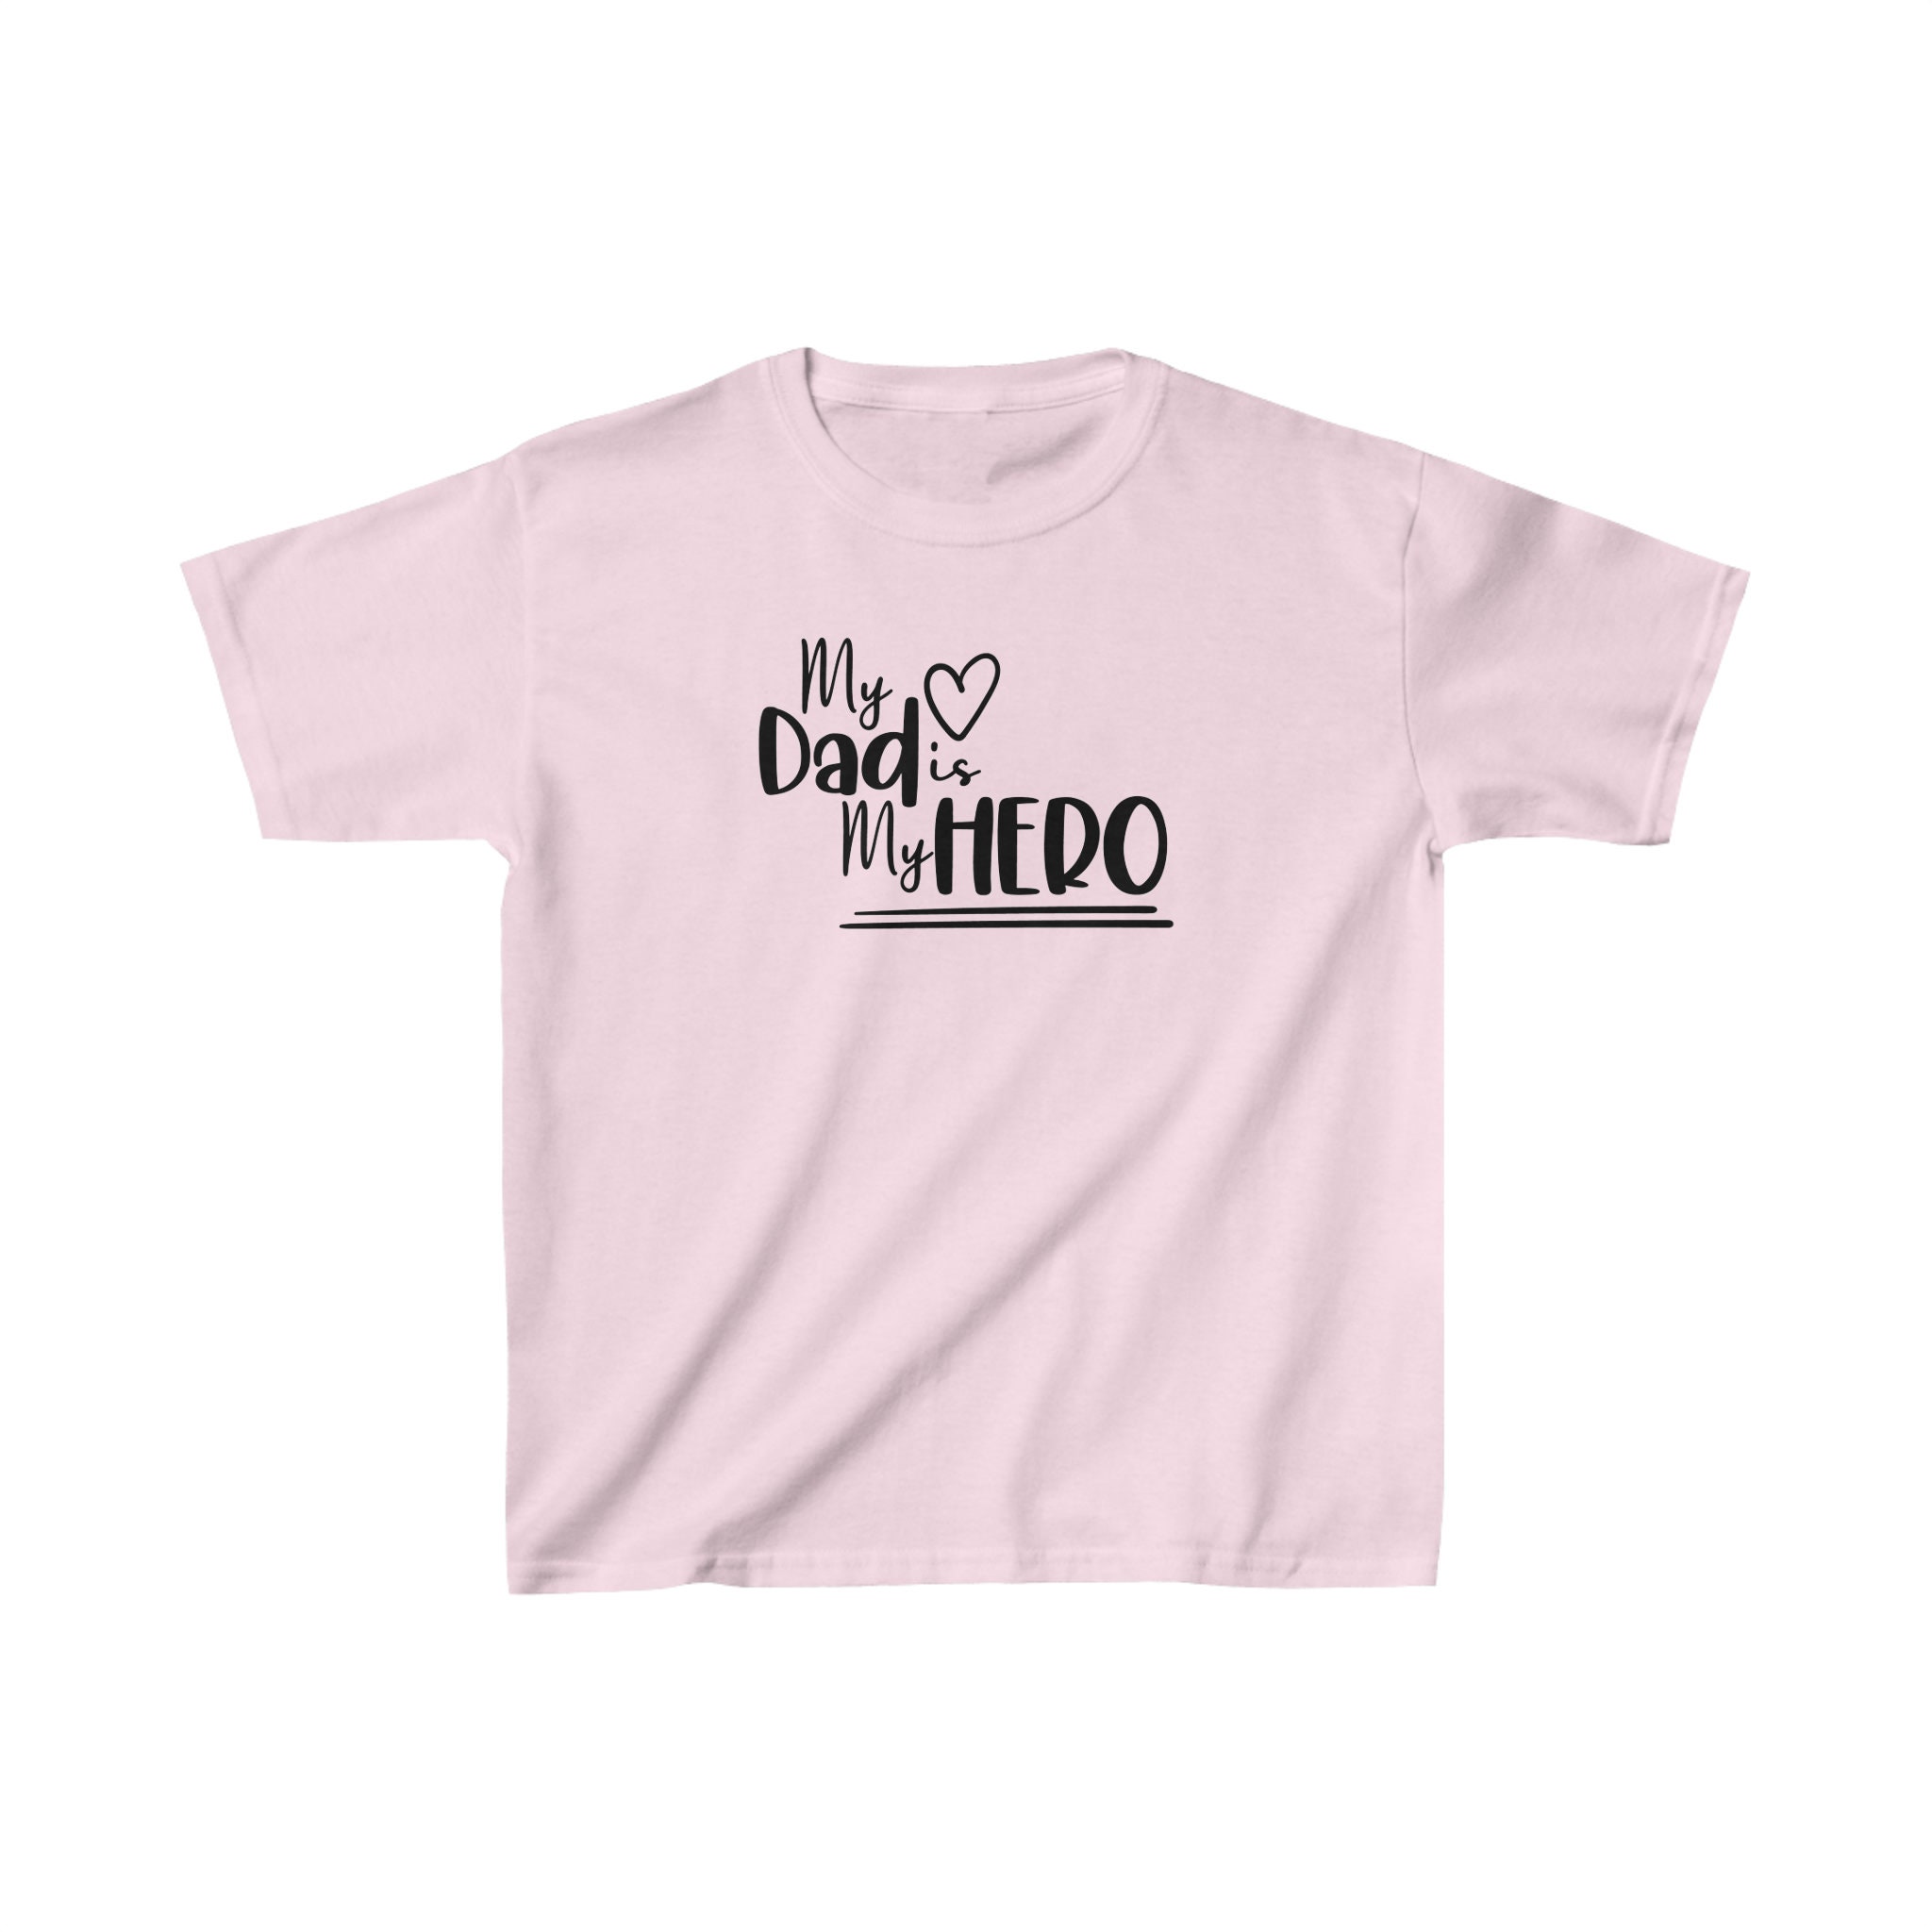 My Dad is My Hero Tee Kids Heavy Cotton Tee Father's Day Tee for Kids - Etsy